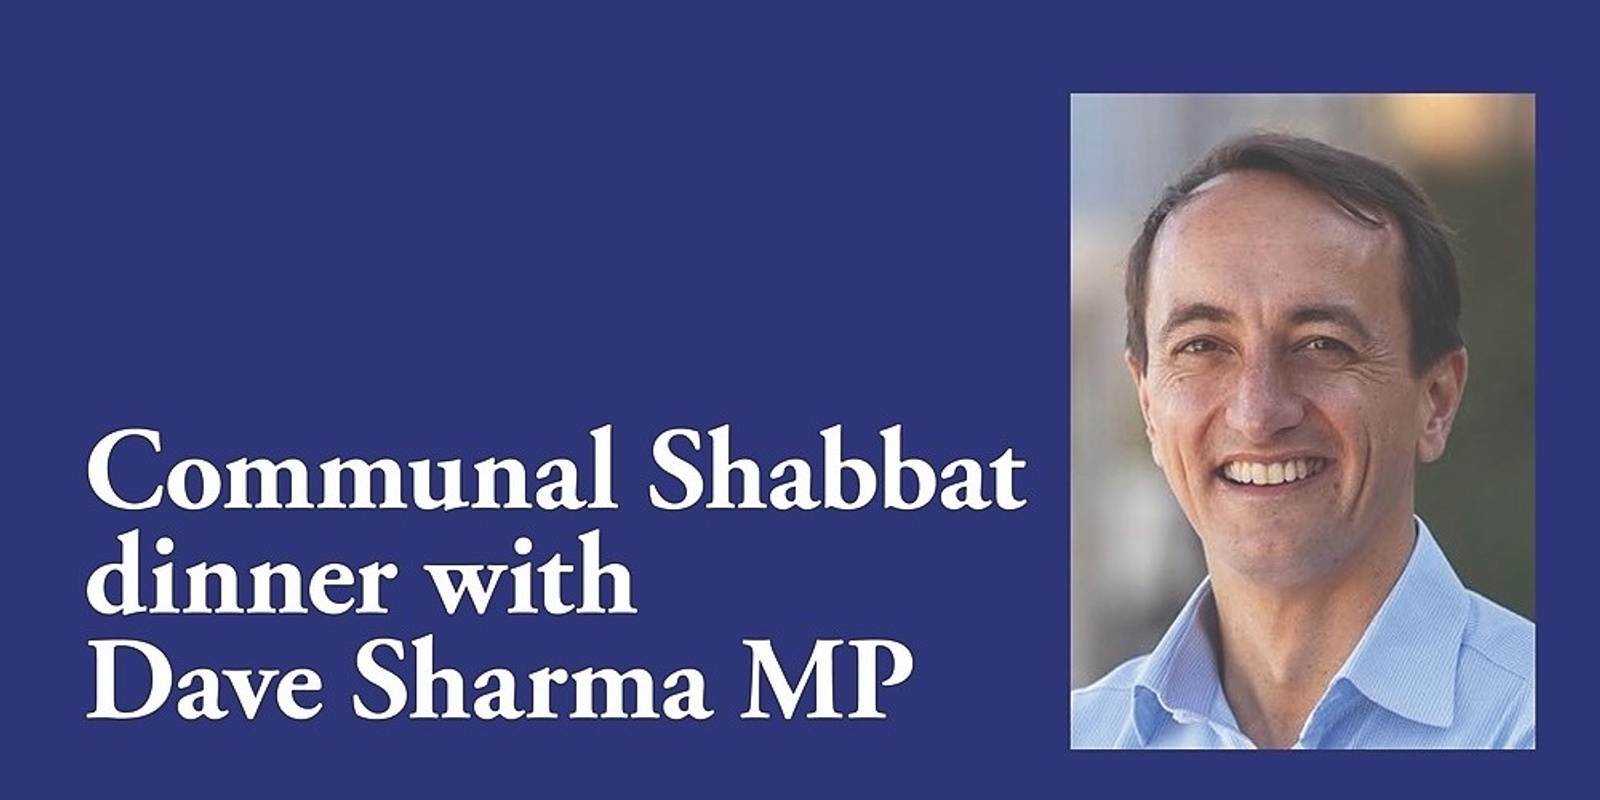 Banner image for Emanuel Synagogue Communal Dinner with Dave Sharma MP